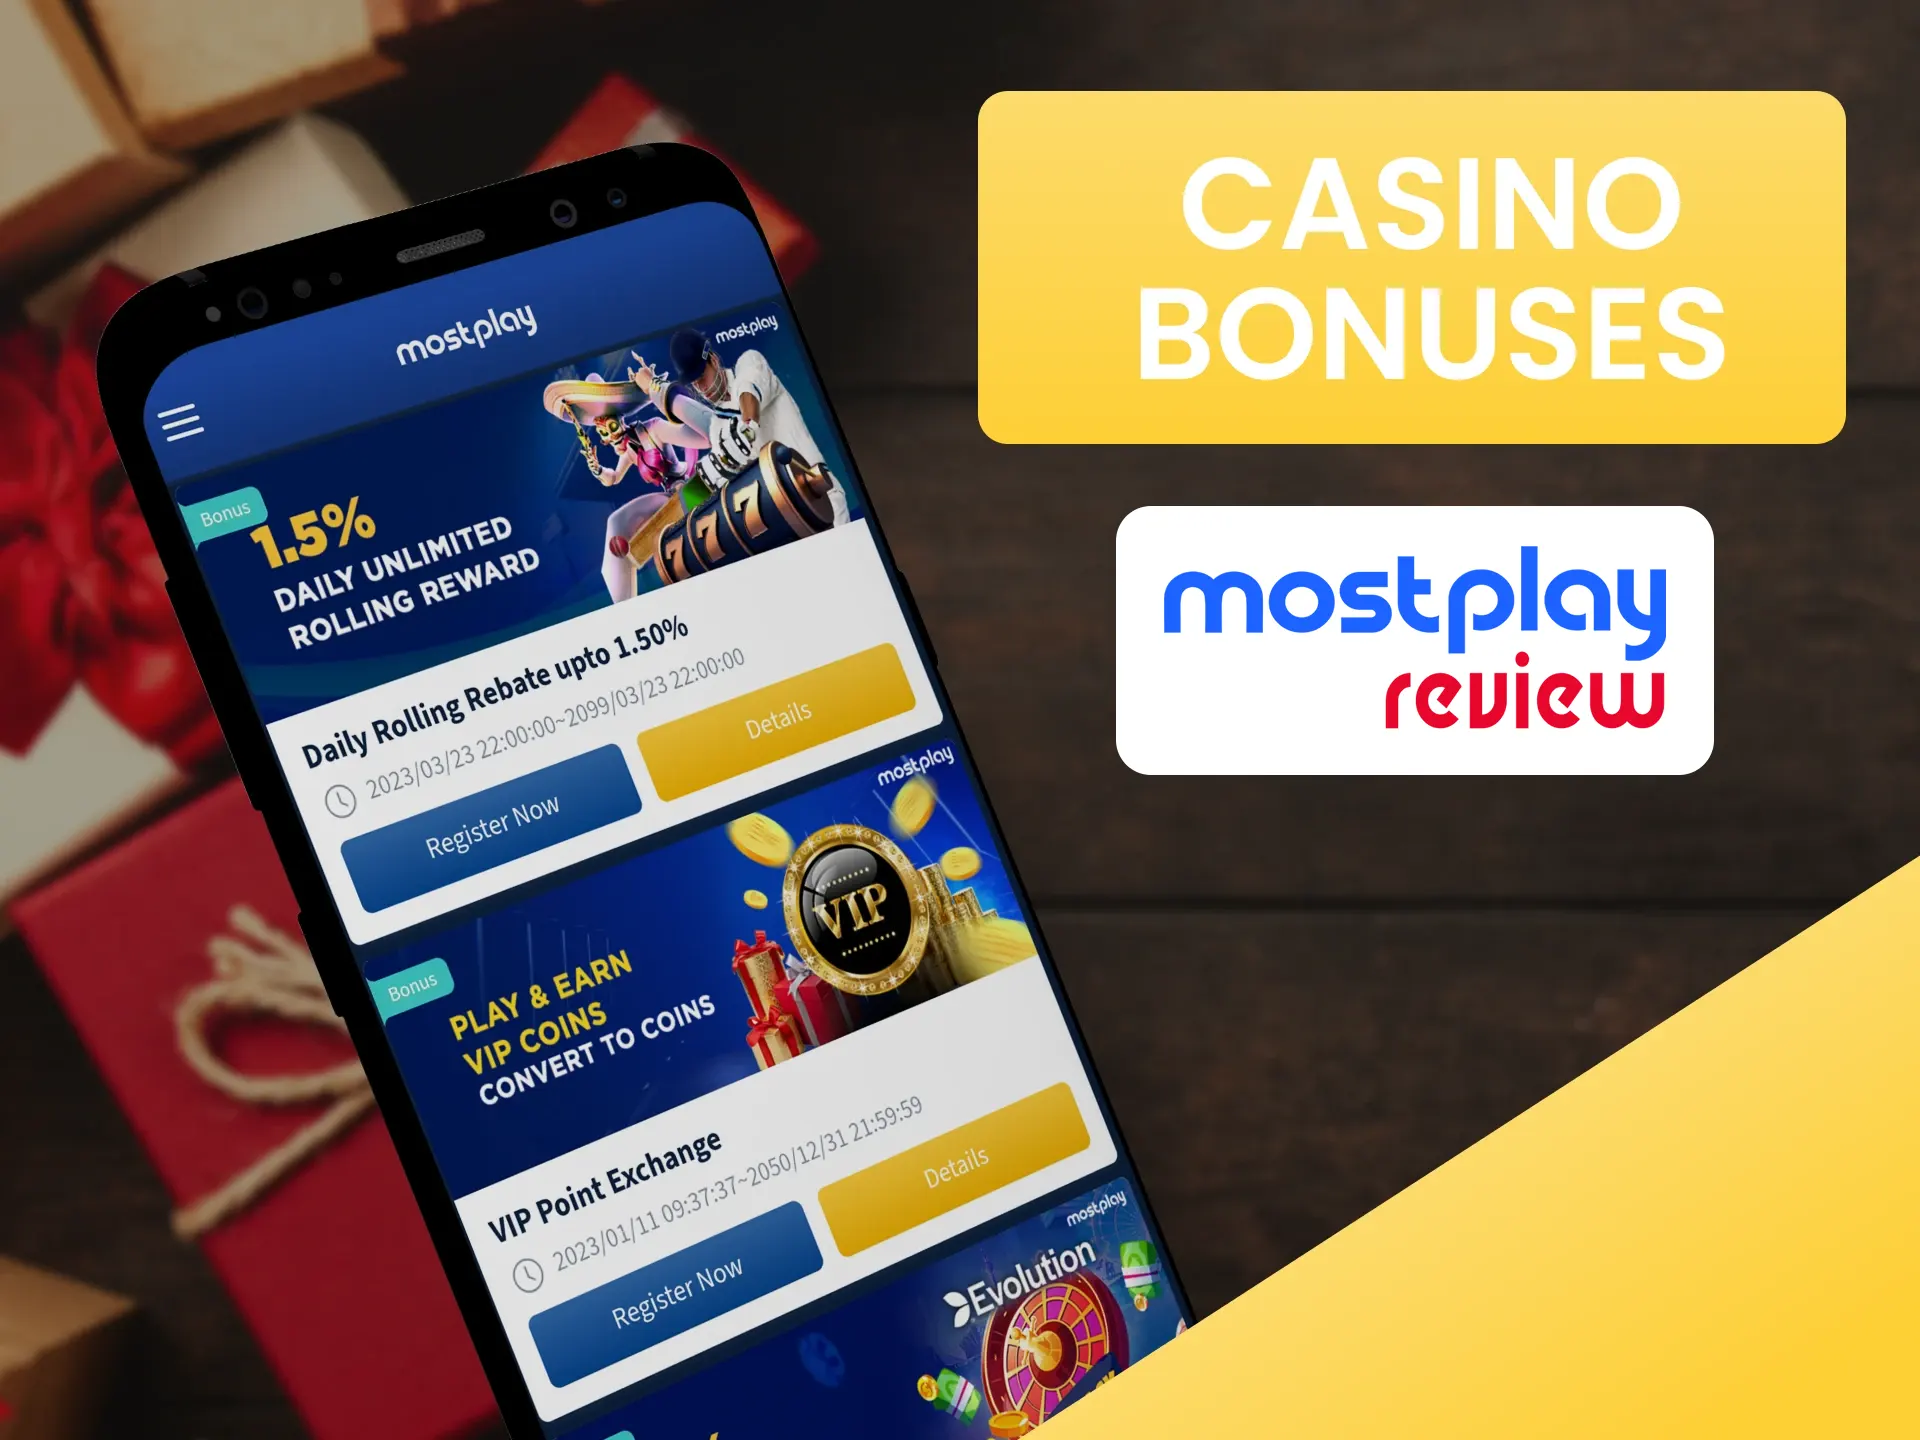 Mostplay gives bonuses for playing at Live Casino.